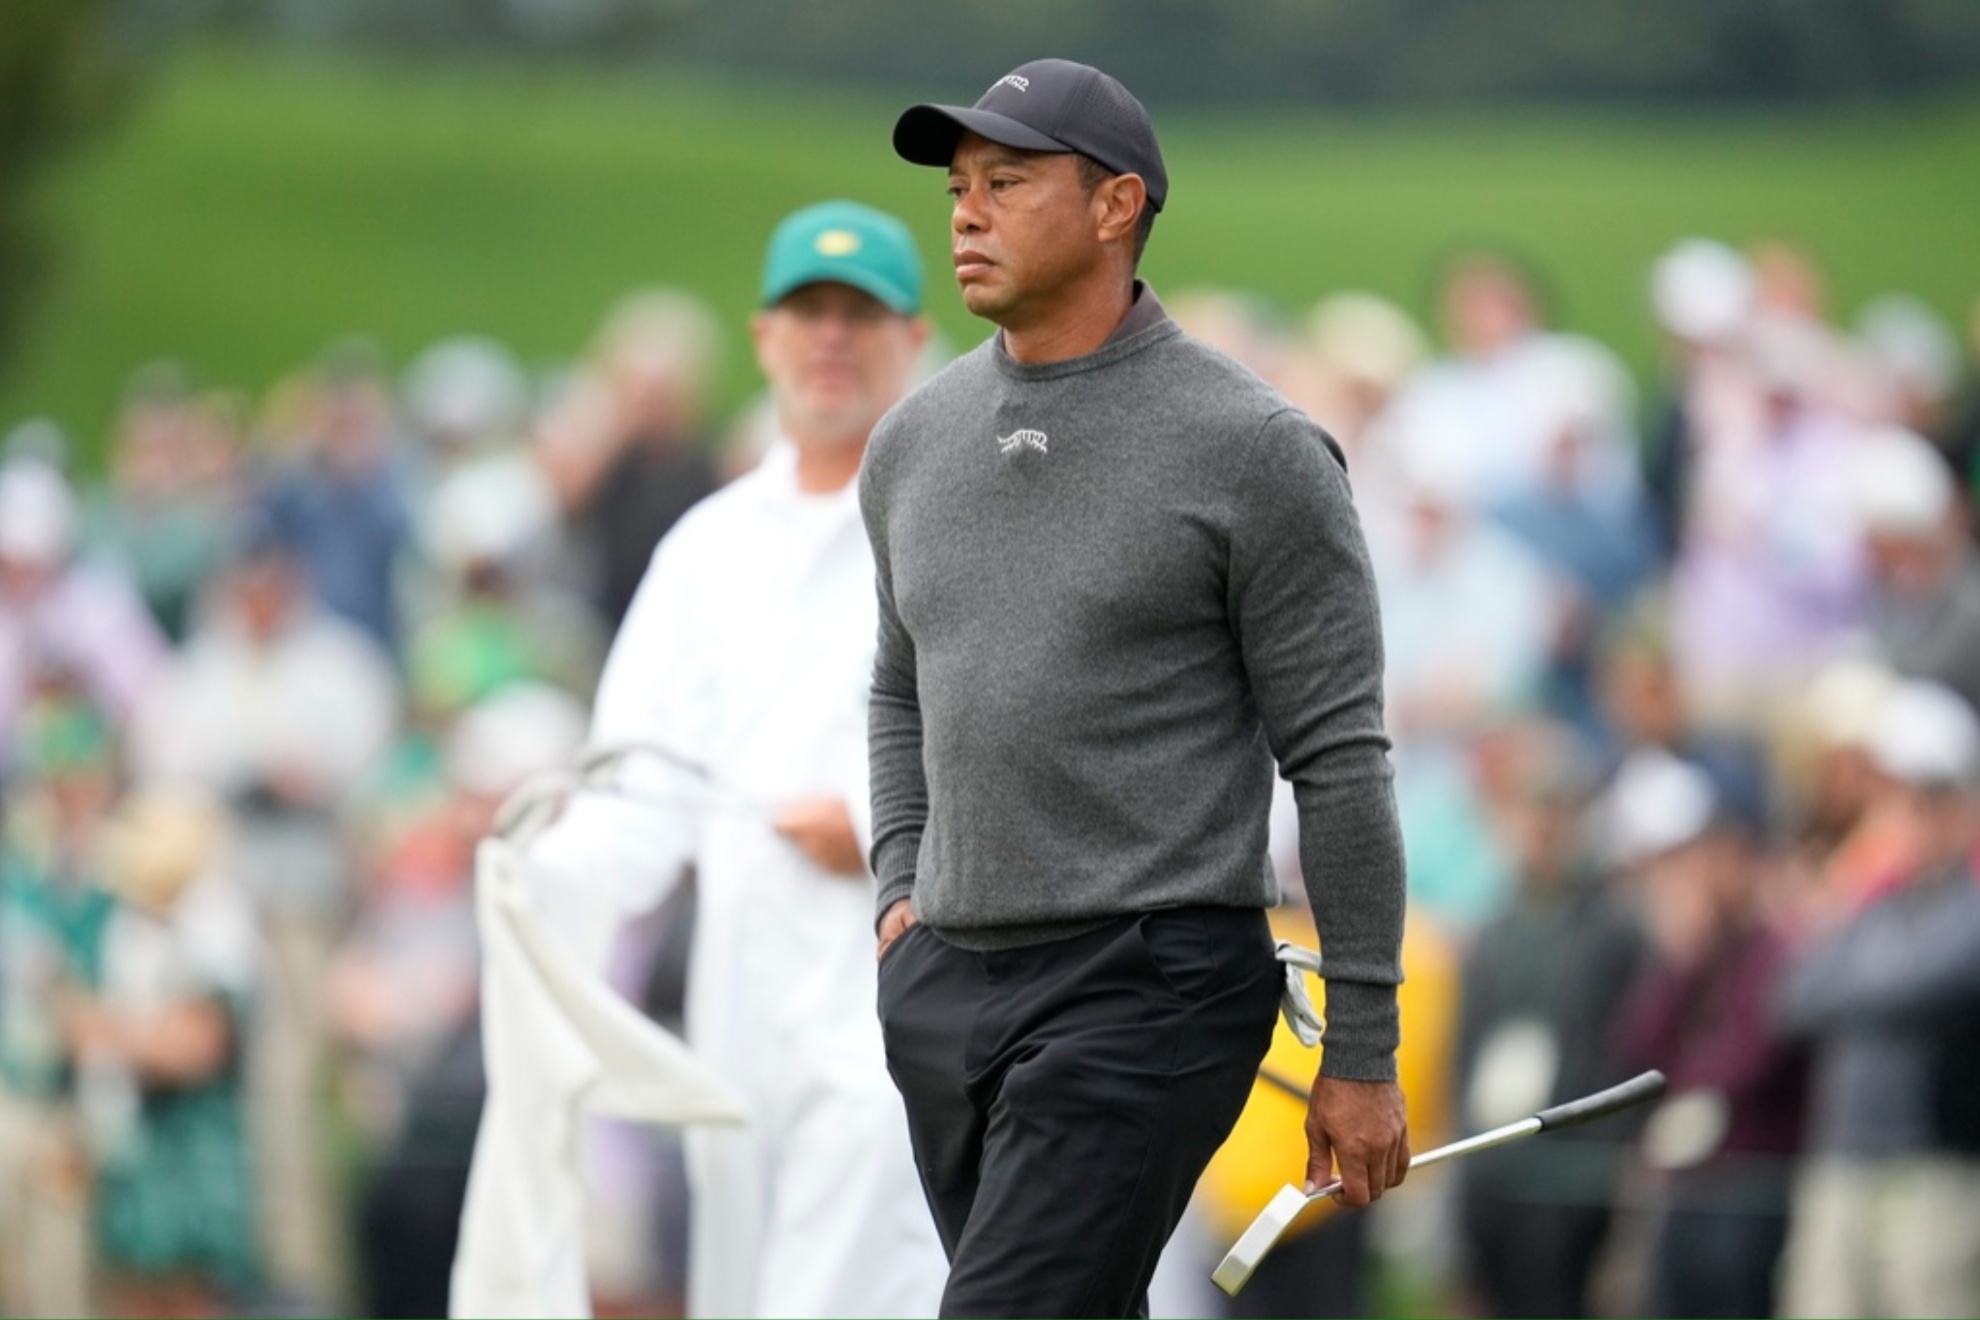 Tiger Woods has only played 24 holes of golf in PGA Tour events so far this season